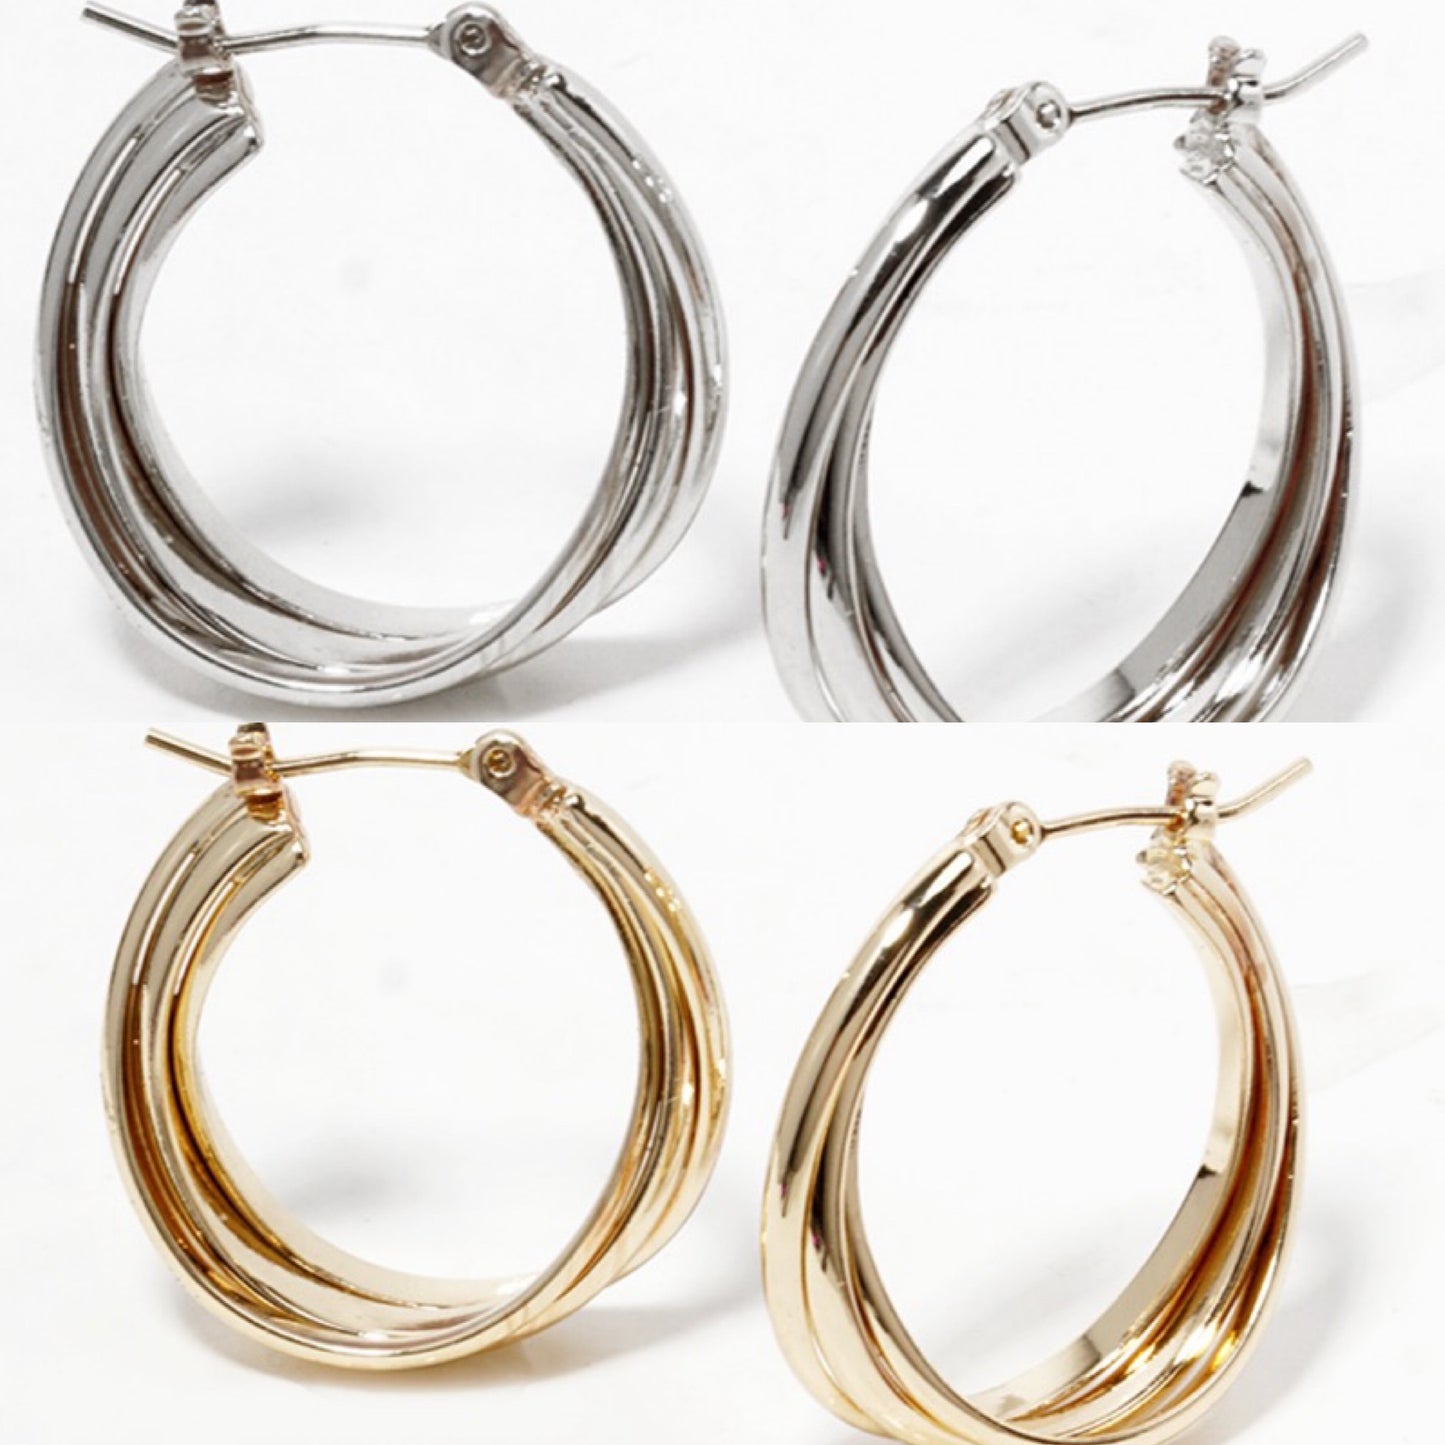 New! Layered Hoop Earrings - Gold or Silver